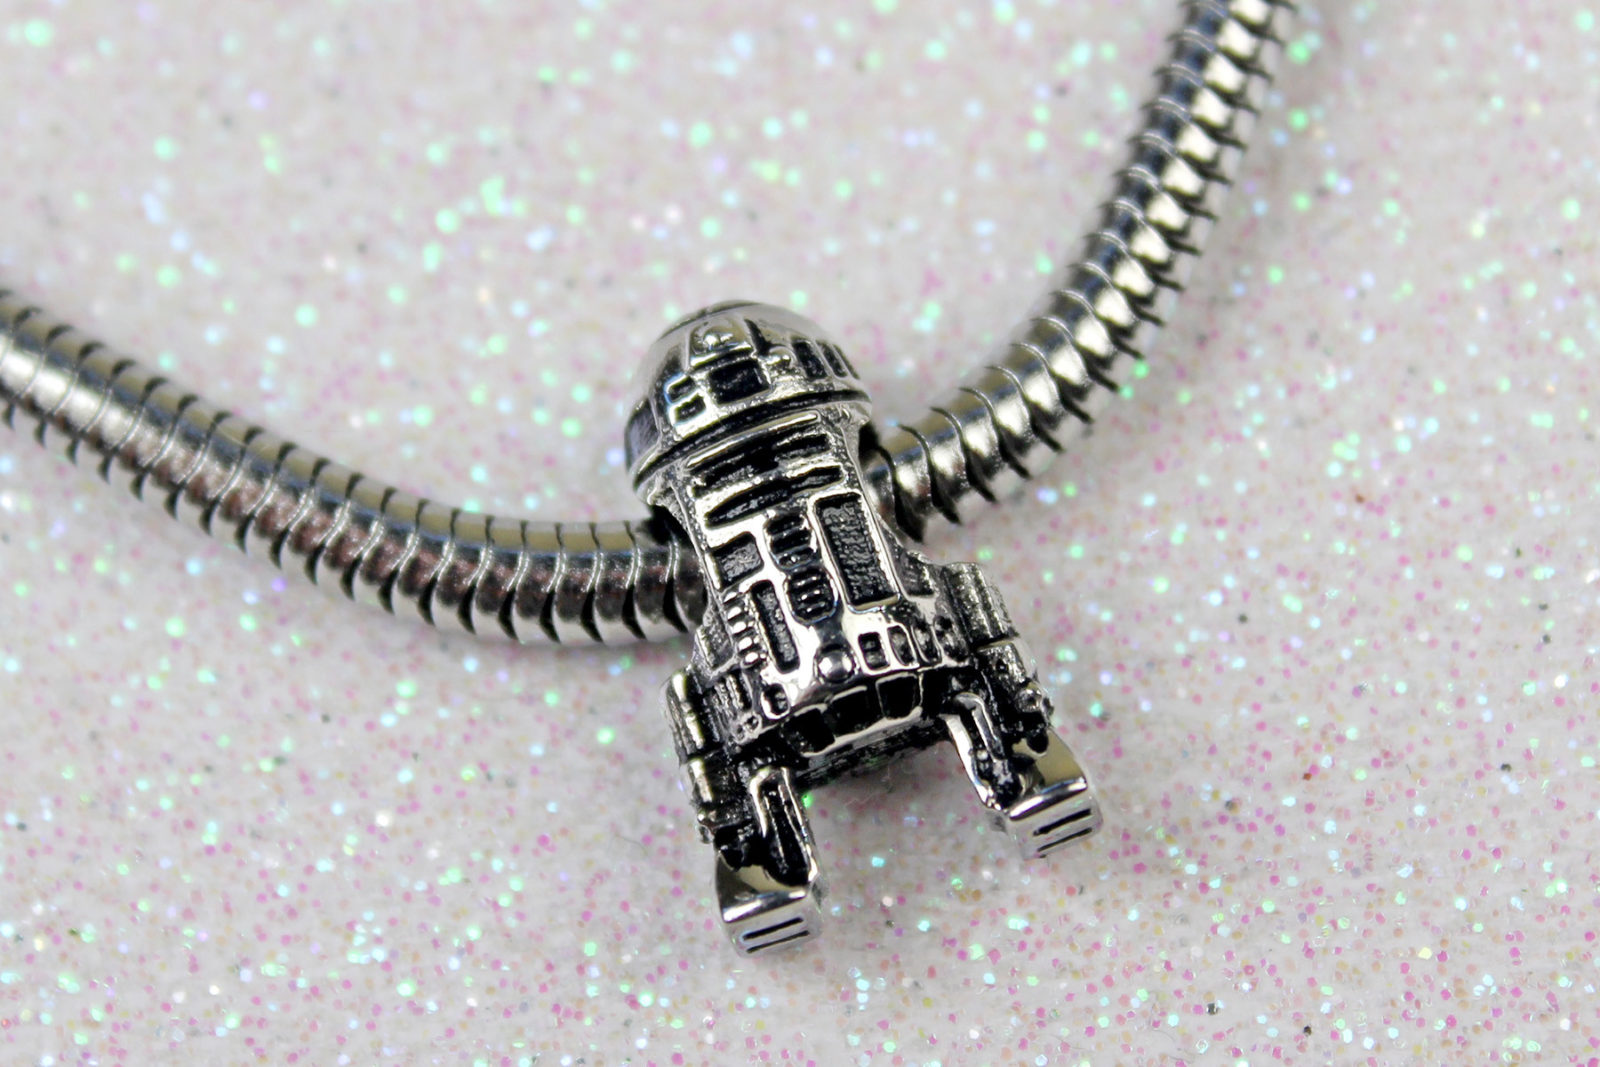 Review – Body Vibe R2-D2 bead charm